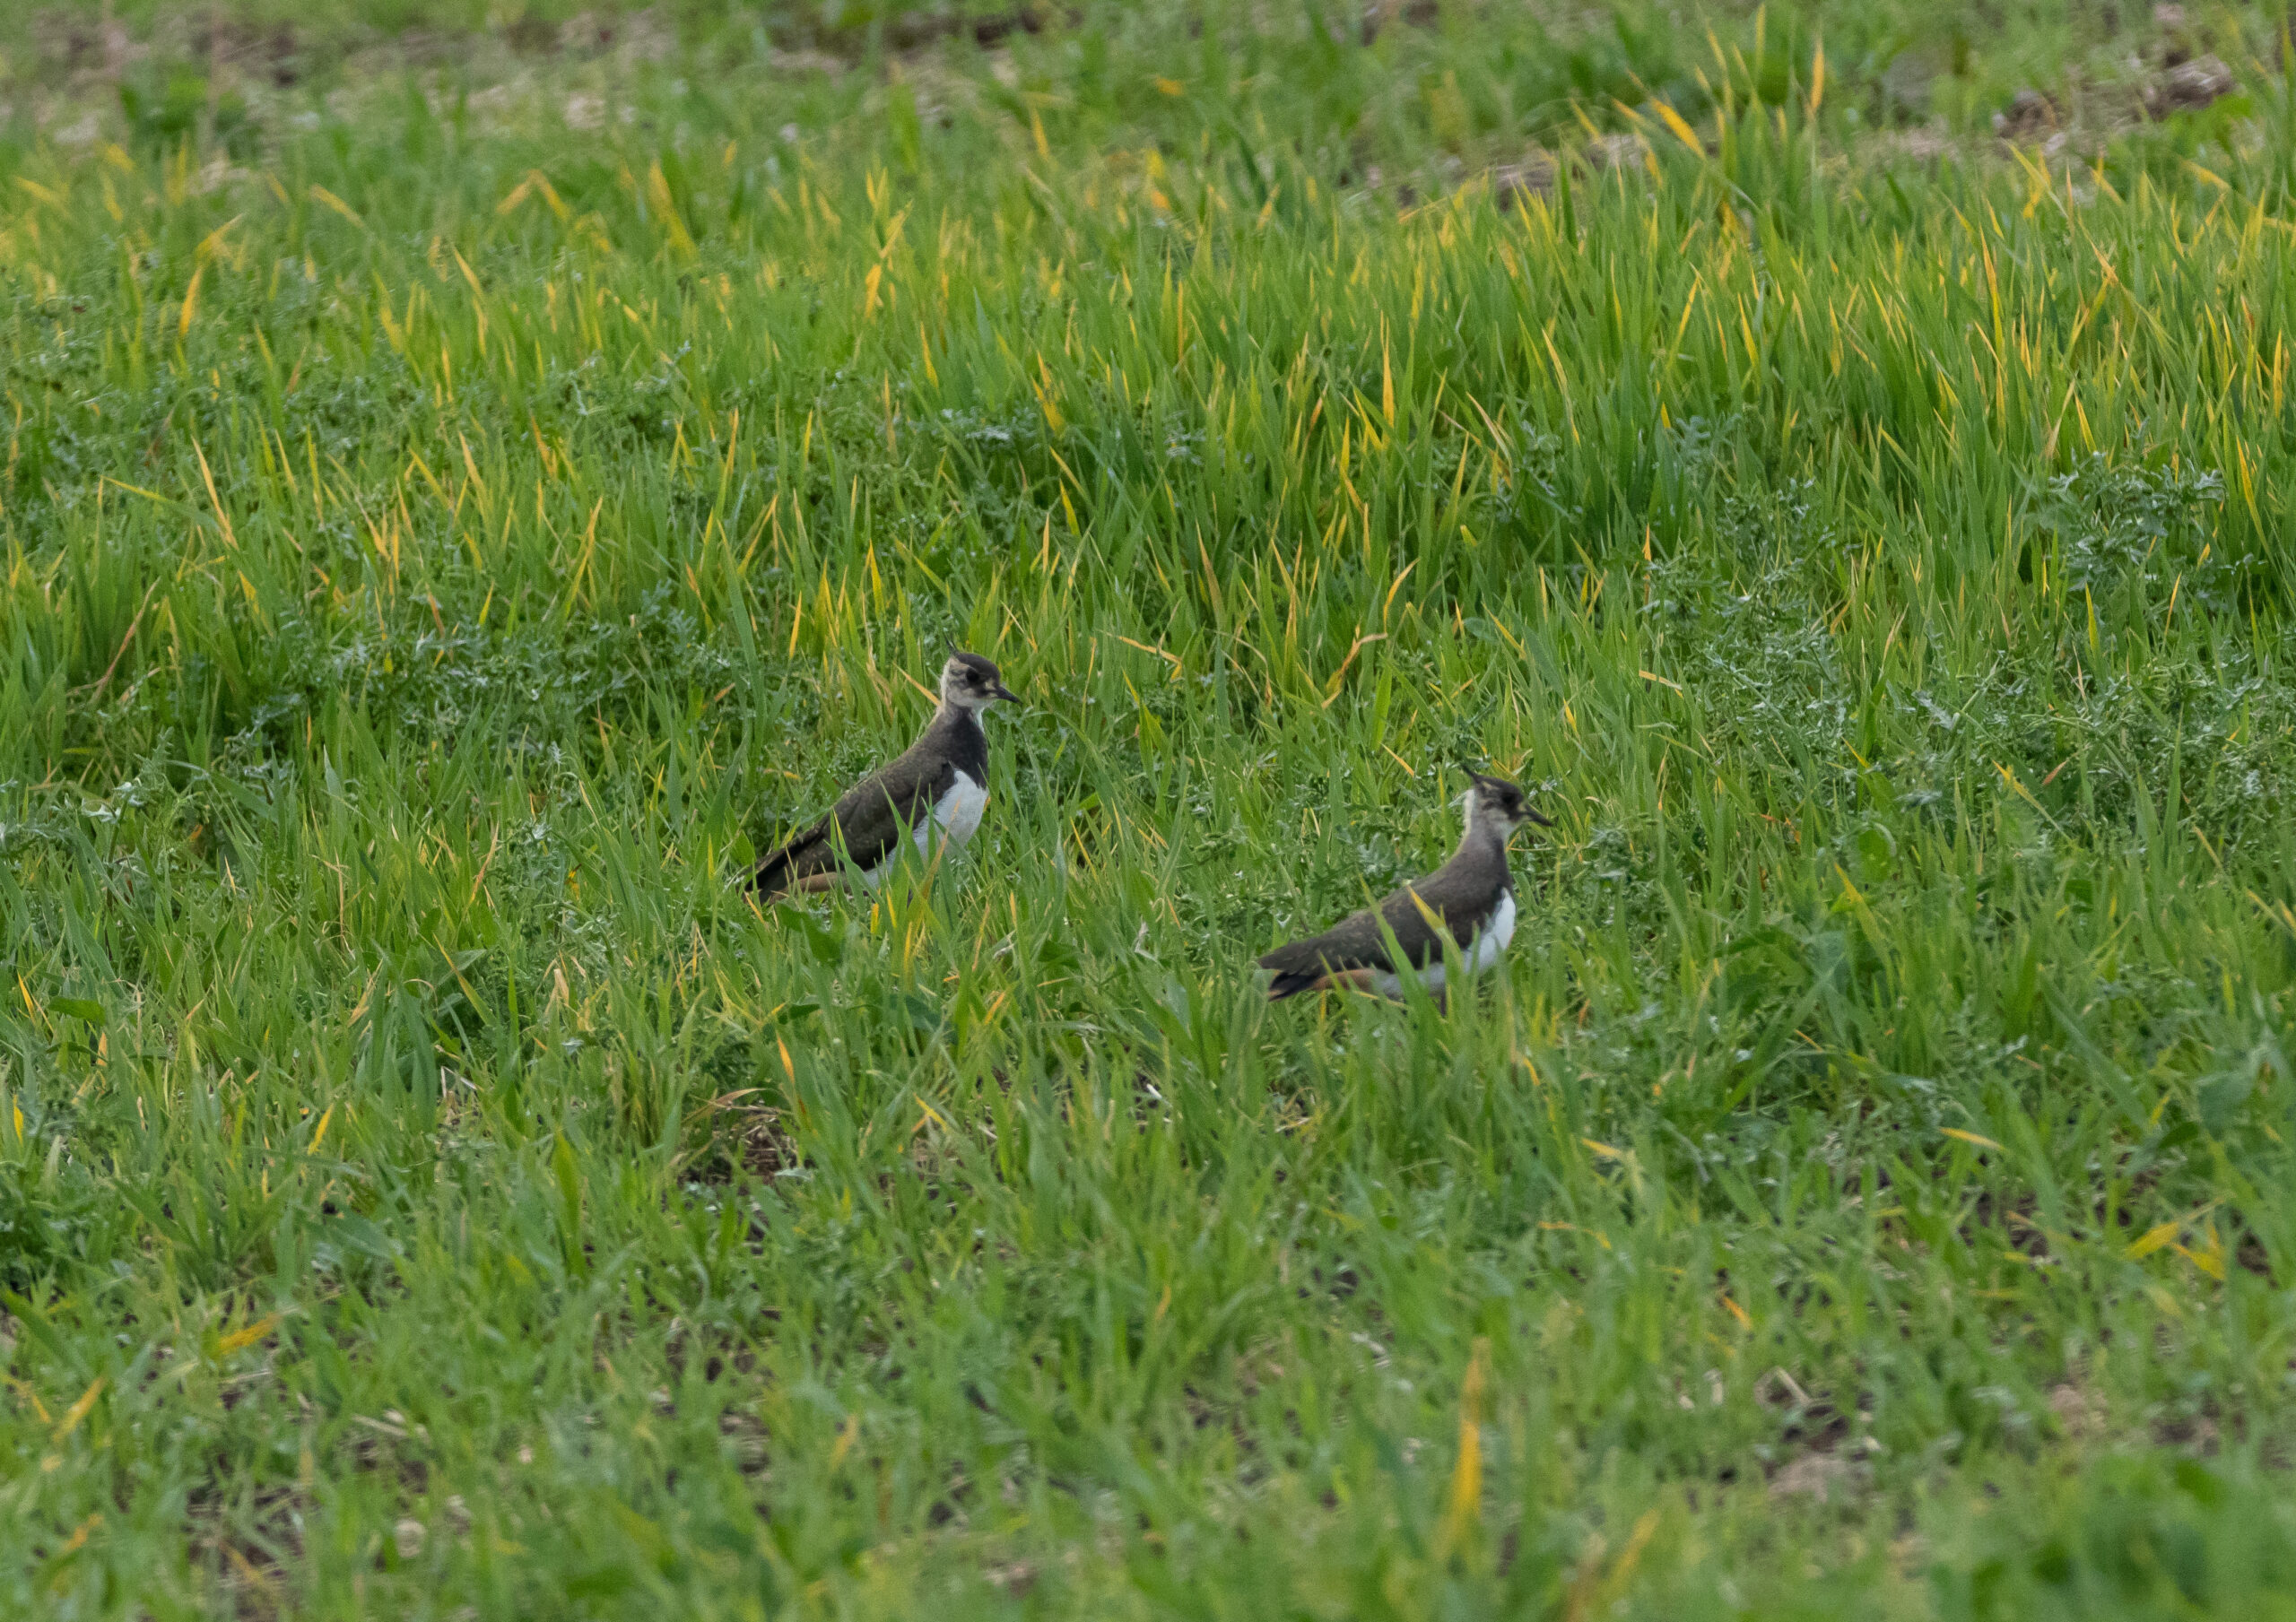 2 lapwing in grass 2022